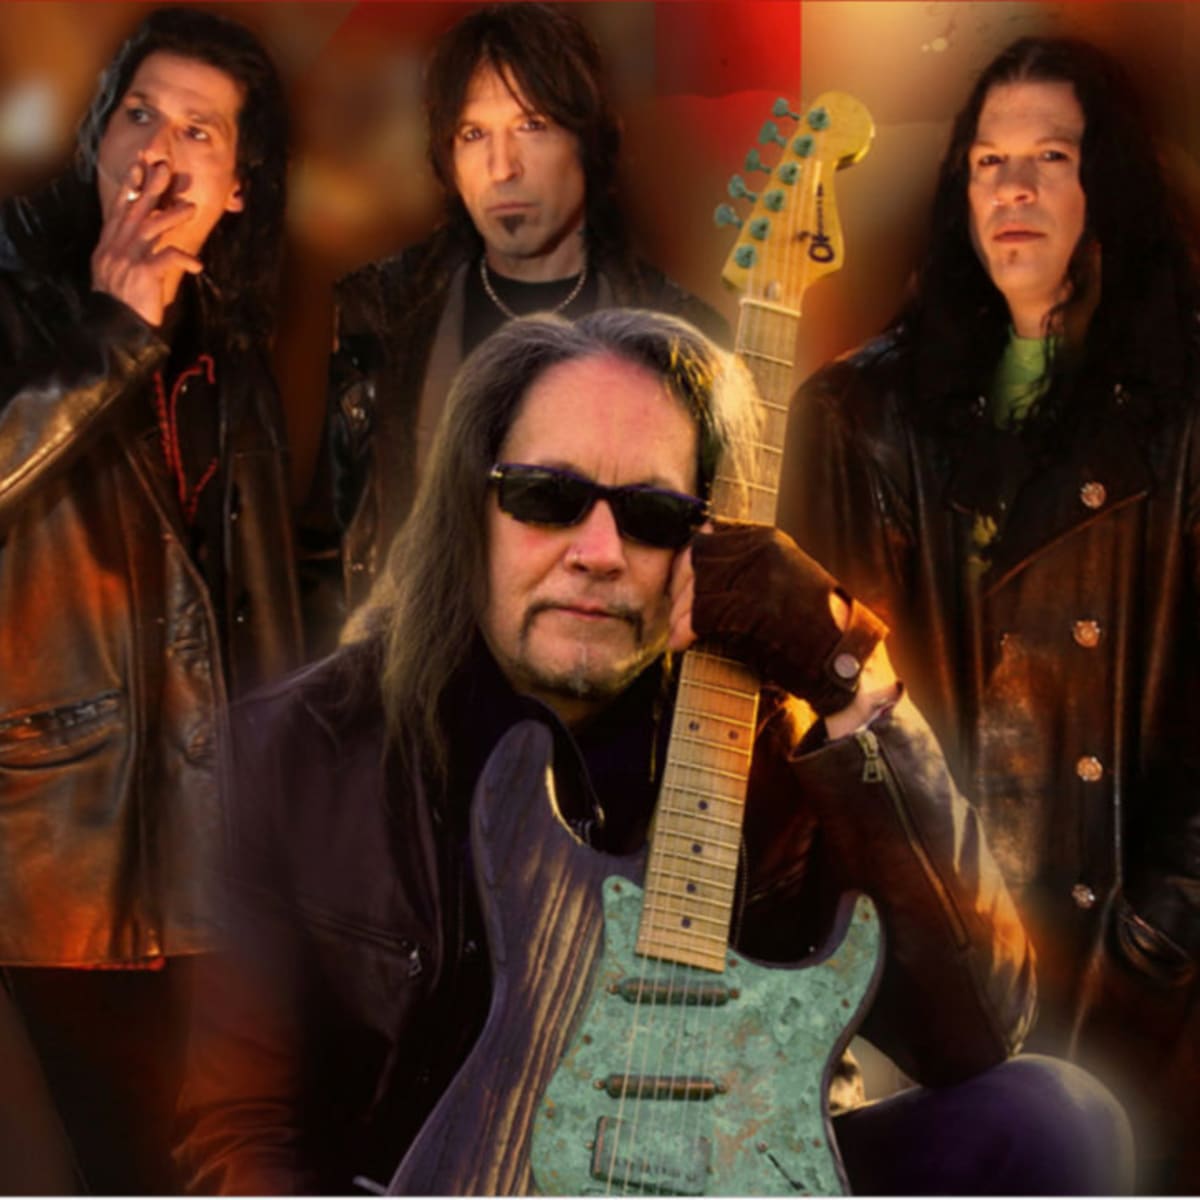 Former Ozzy guitarist, Jake E Lee, clears up the past and moves